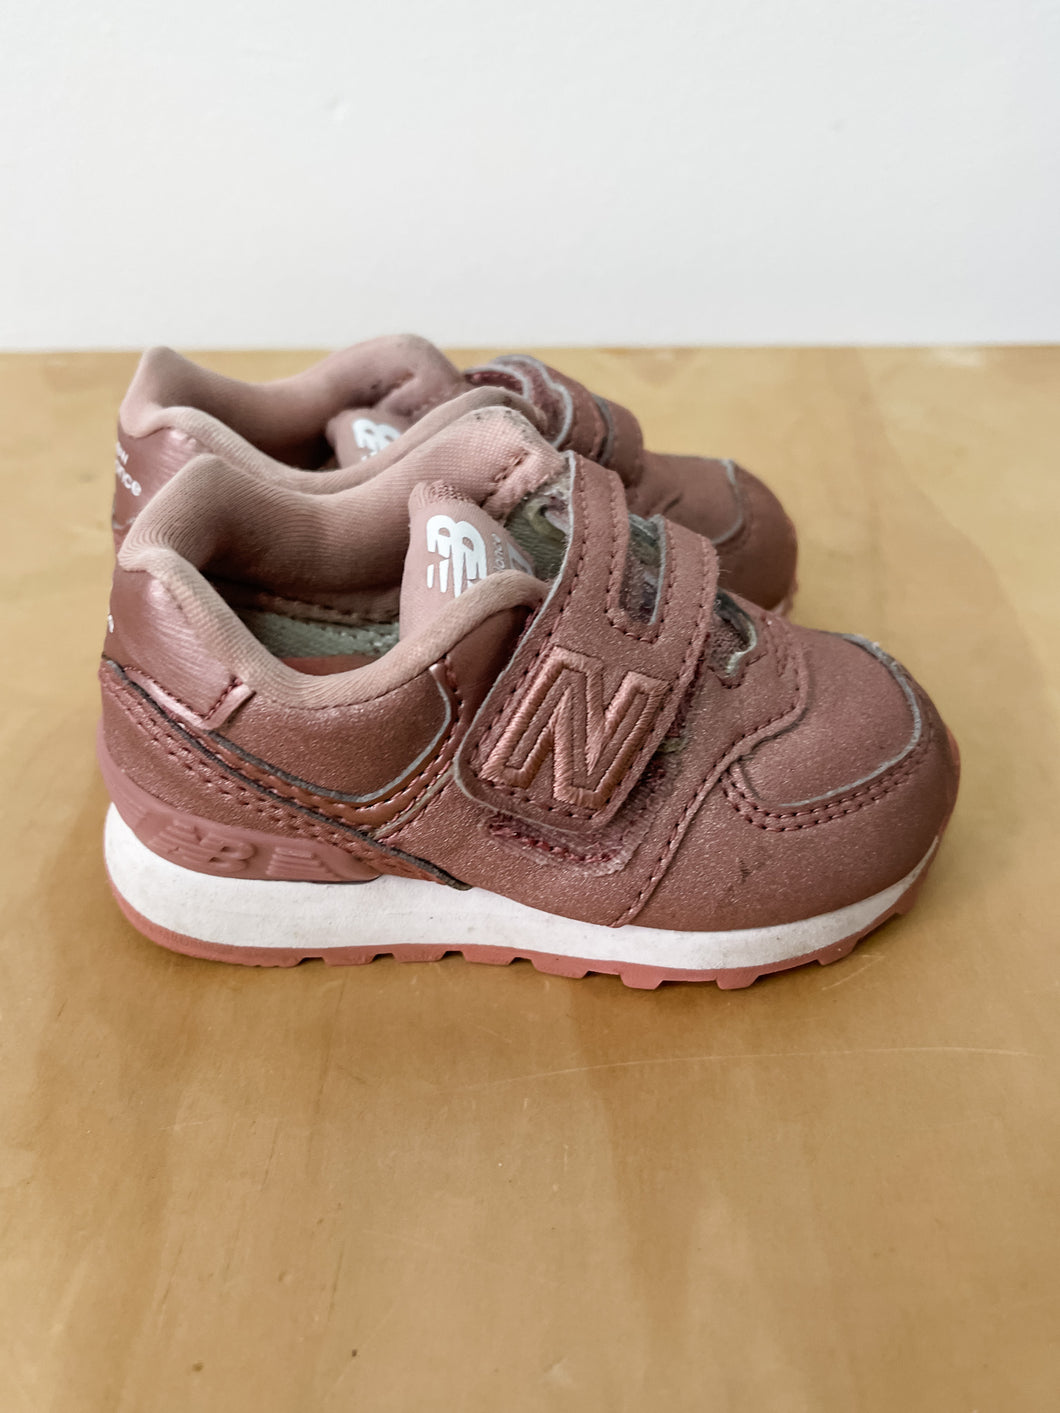 Rose Gold New Balance 574 Runners Size 4